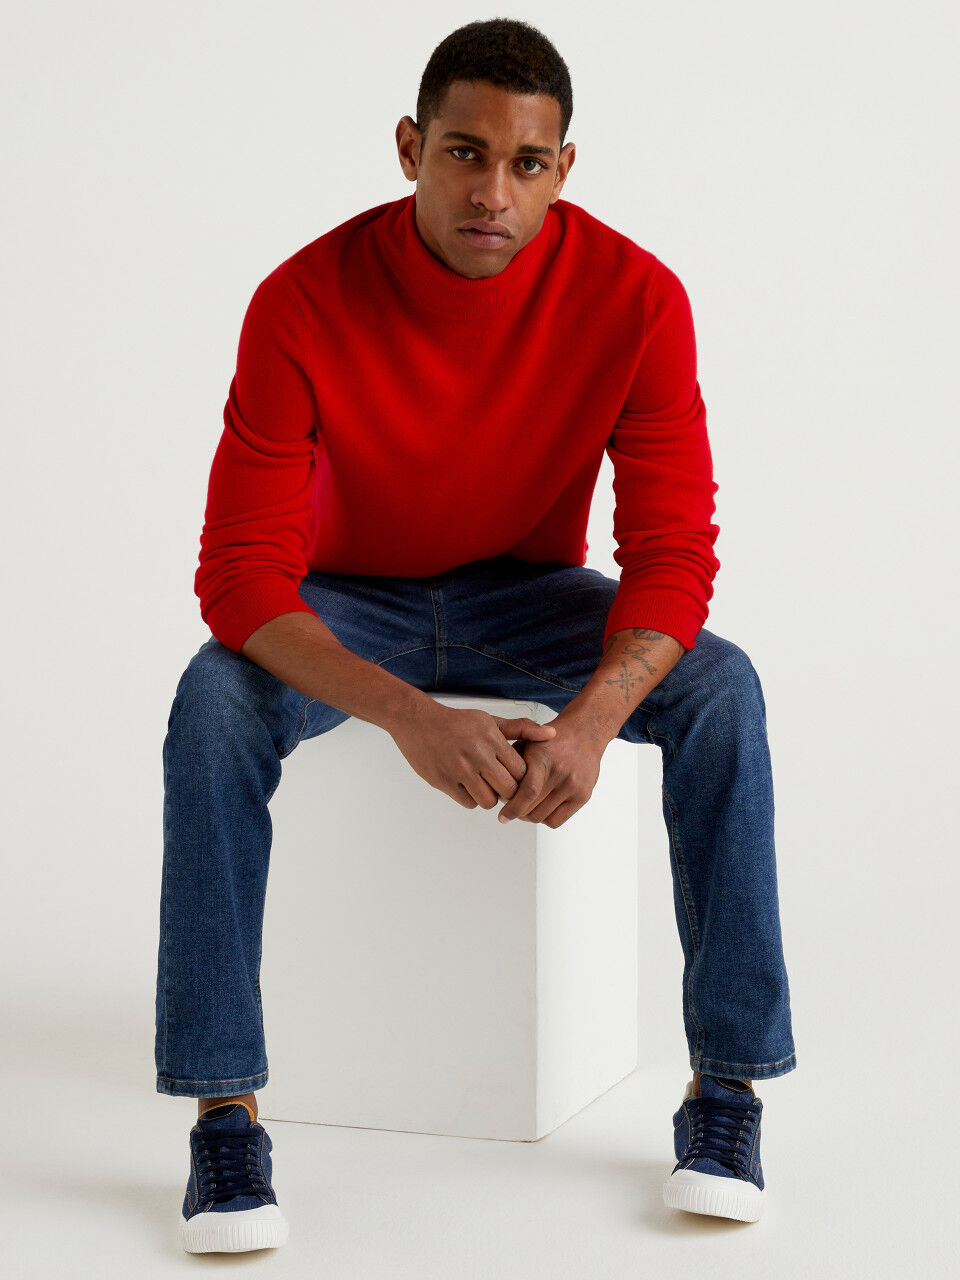 Men's Knitwear and Jumpers Special re-edition | Benetton